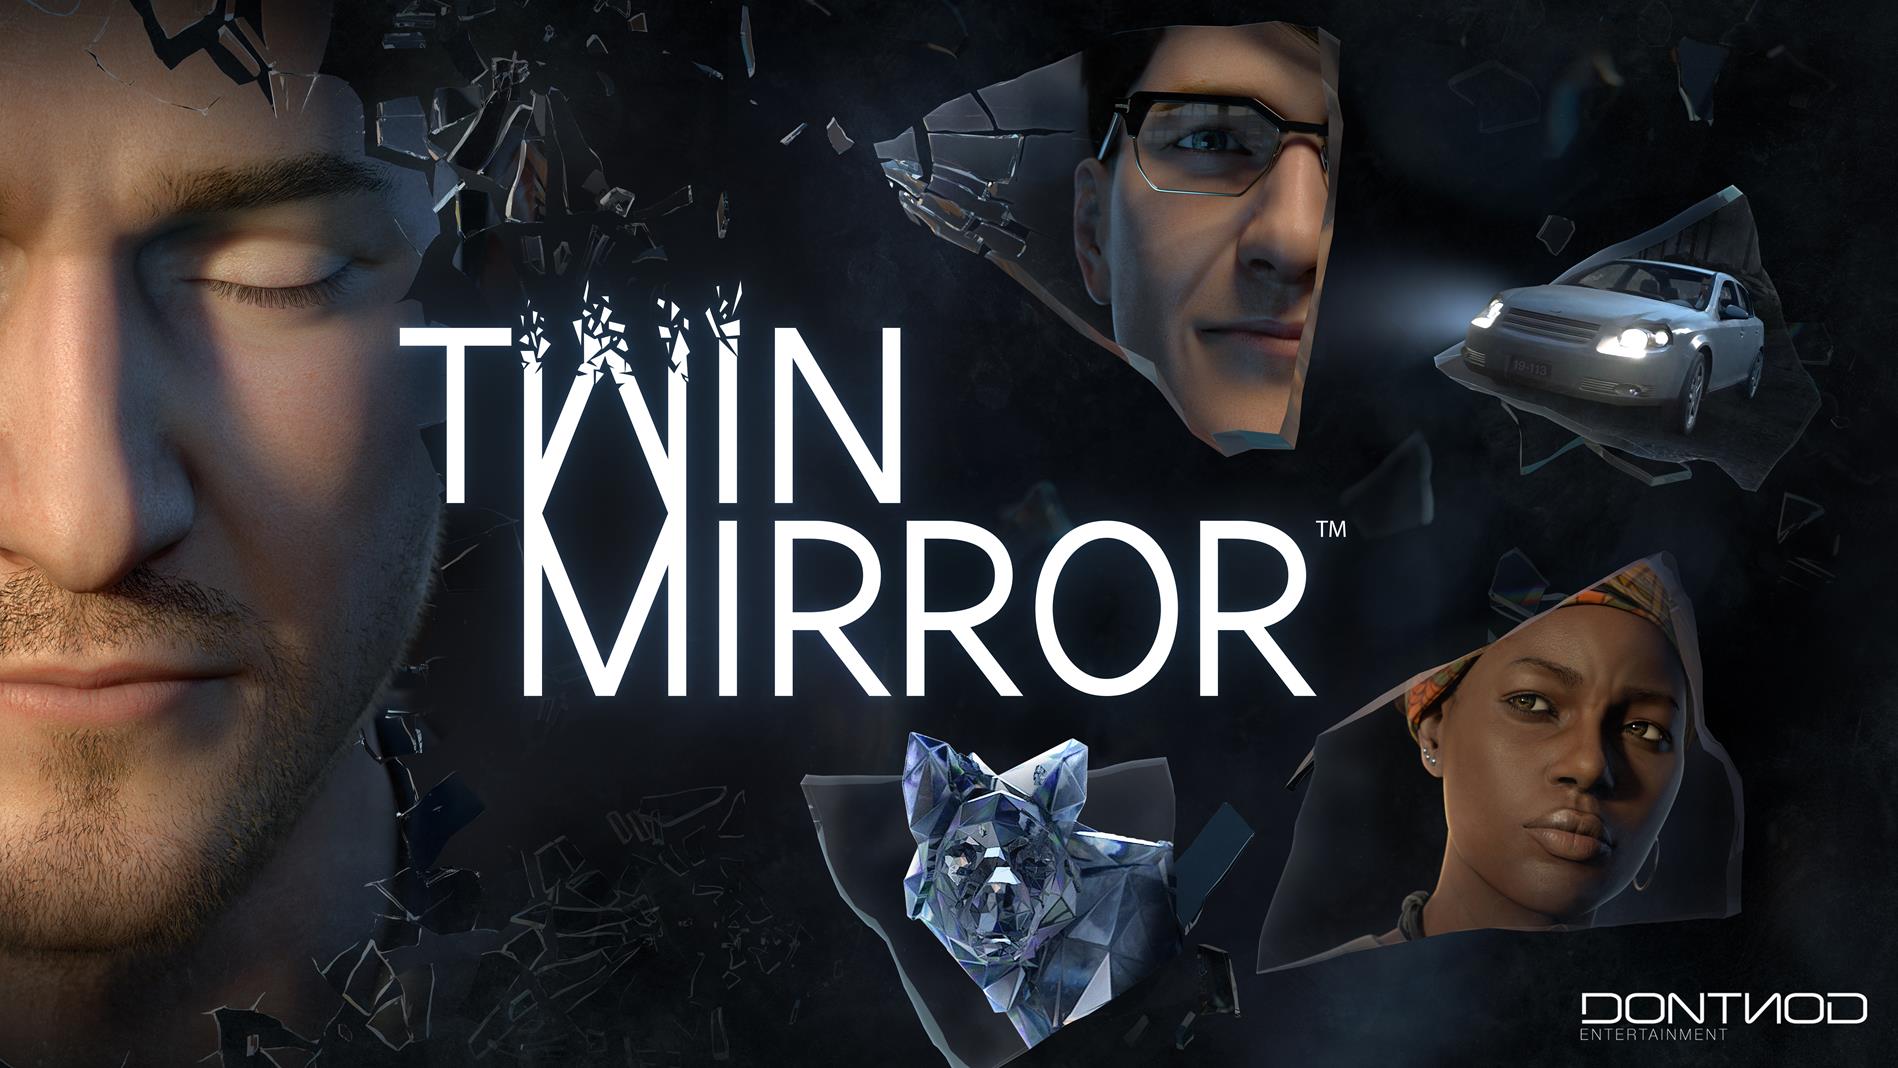 Image for Dontnod's Twin Mirror no longer episodic, still on track for 2020 release